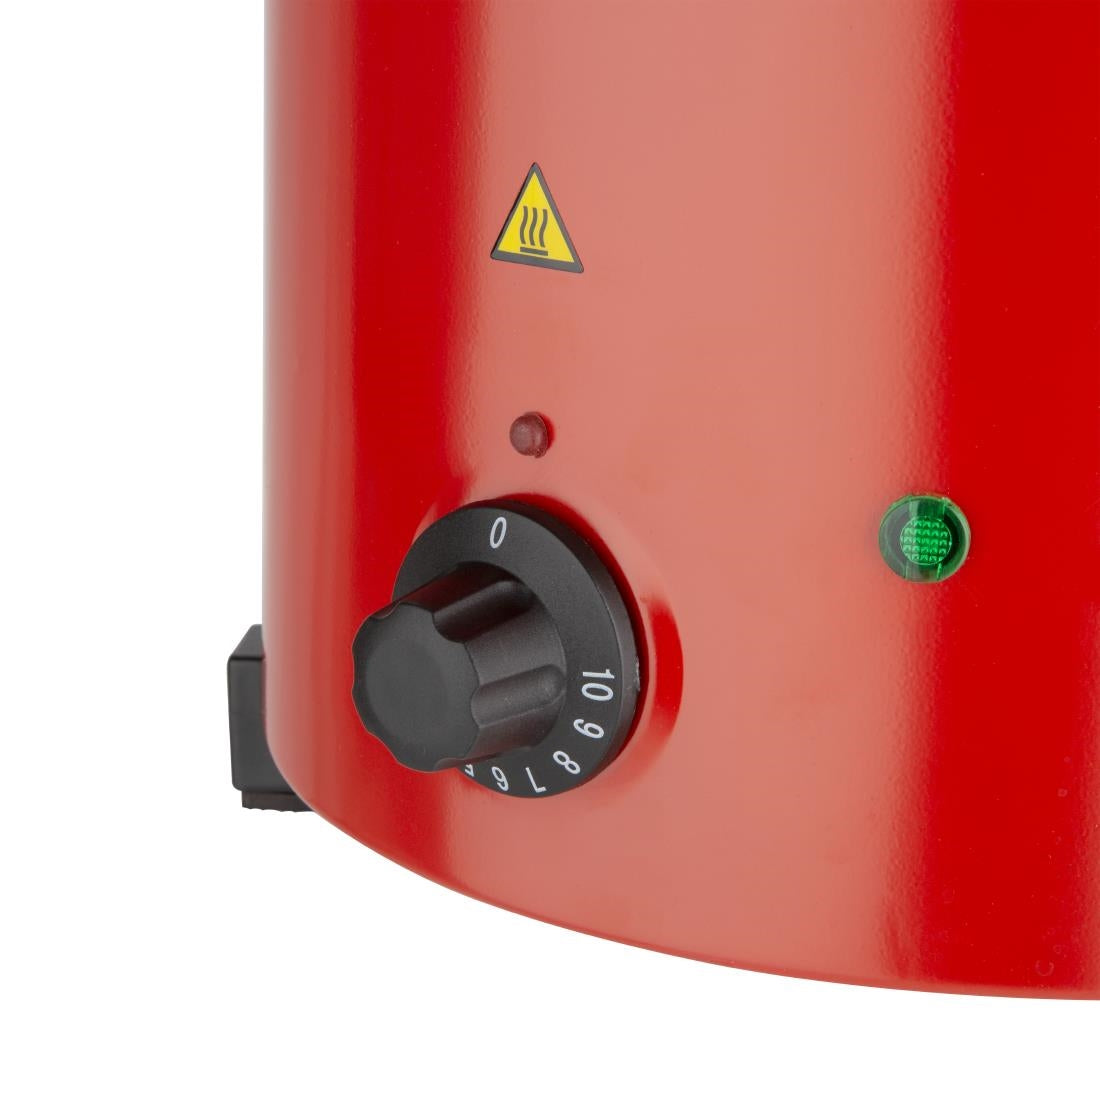 GH227 Buffalo Red Soup Kettle JD Catering Equipment Solutions Ltd